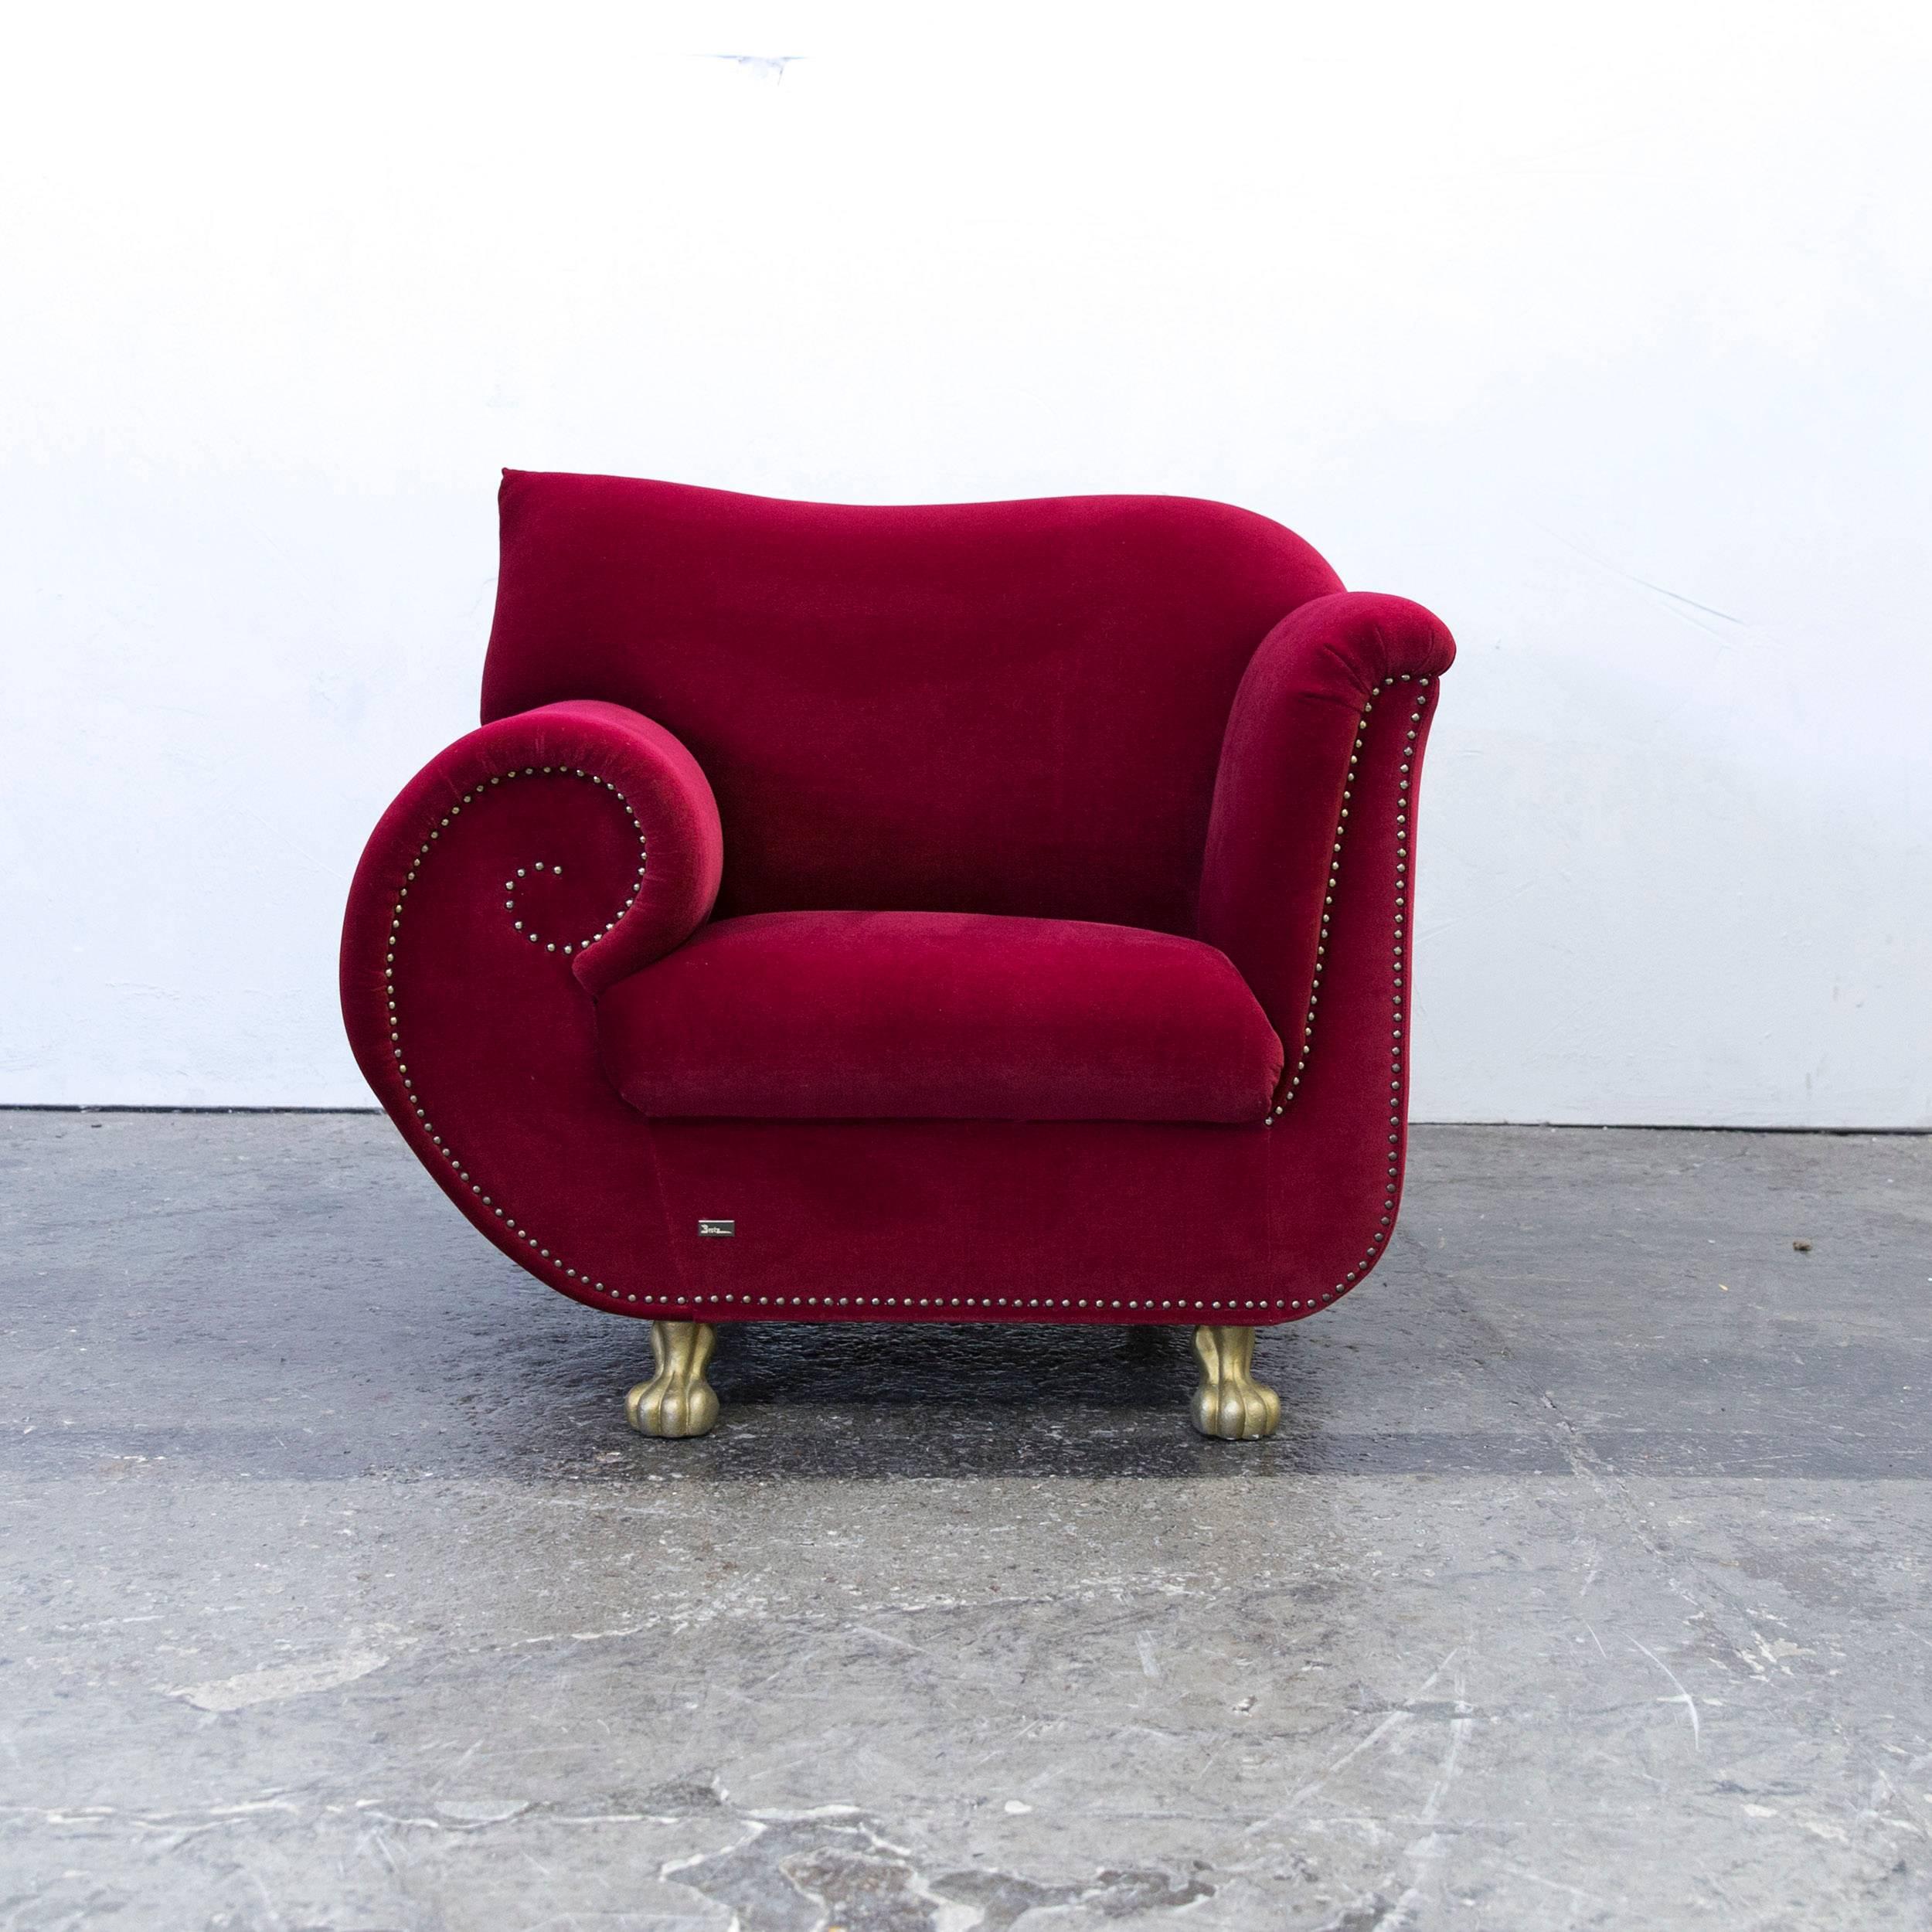 Red colored original Bretz Gaudi designer armchair, in an elegant design, made for pure comfort and style.